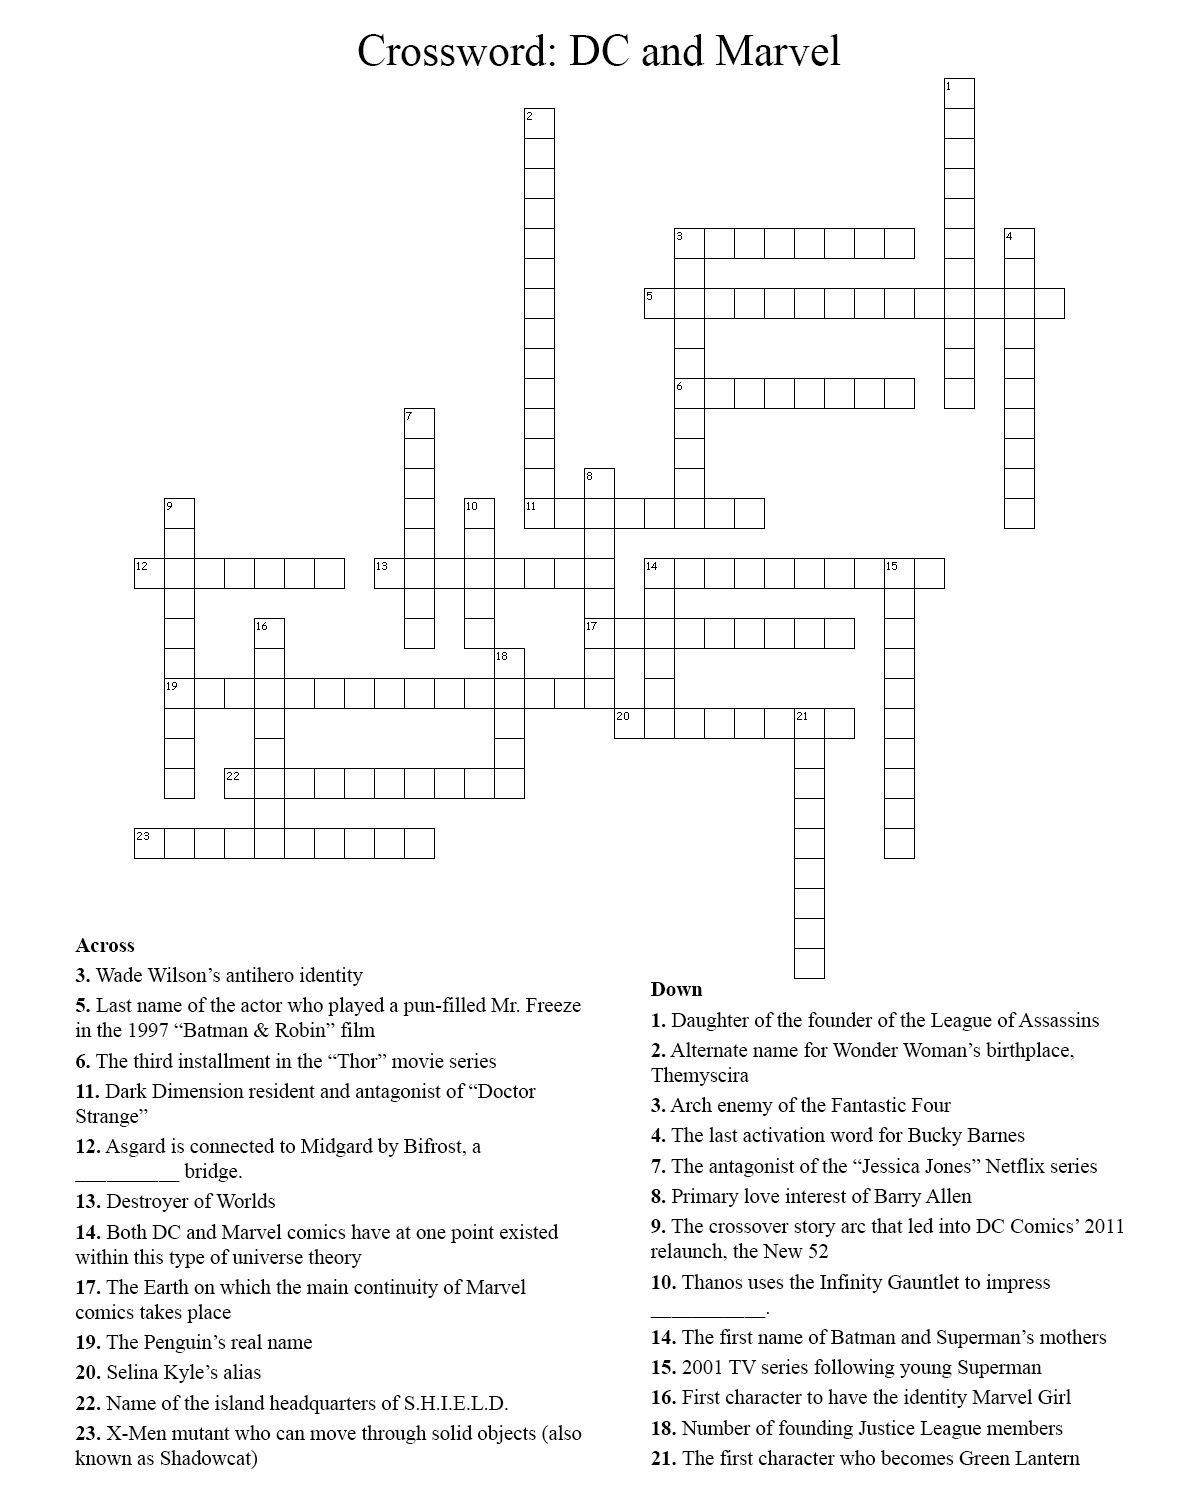 CROSSWORD: A crossword featuring trivia about DC and Marvel. Graphic created by The Signal online editor, Krista Kamp.